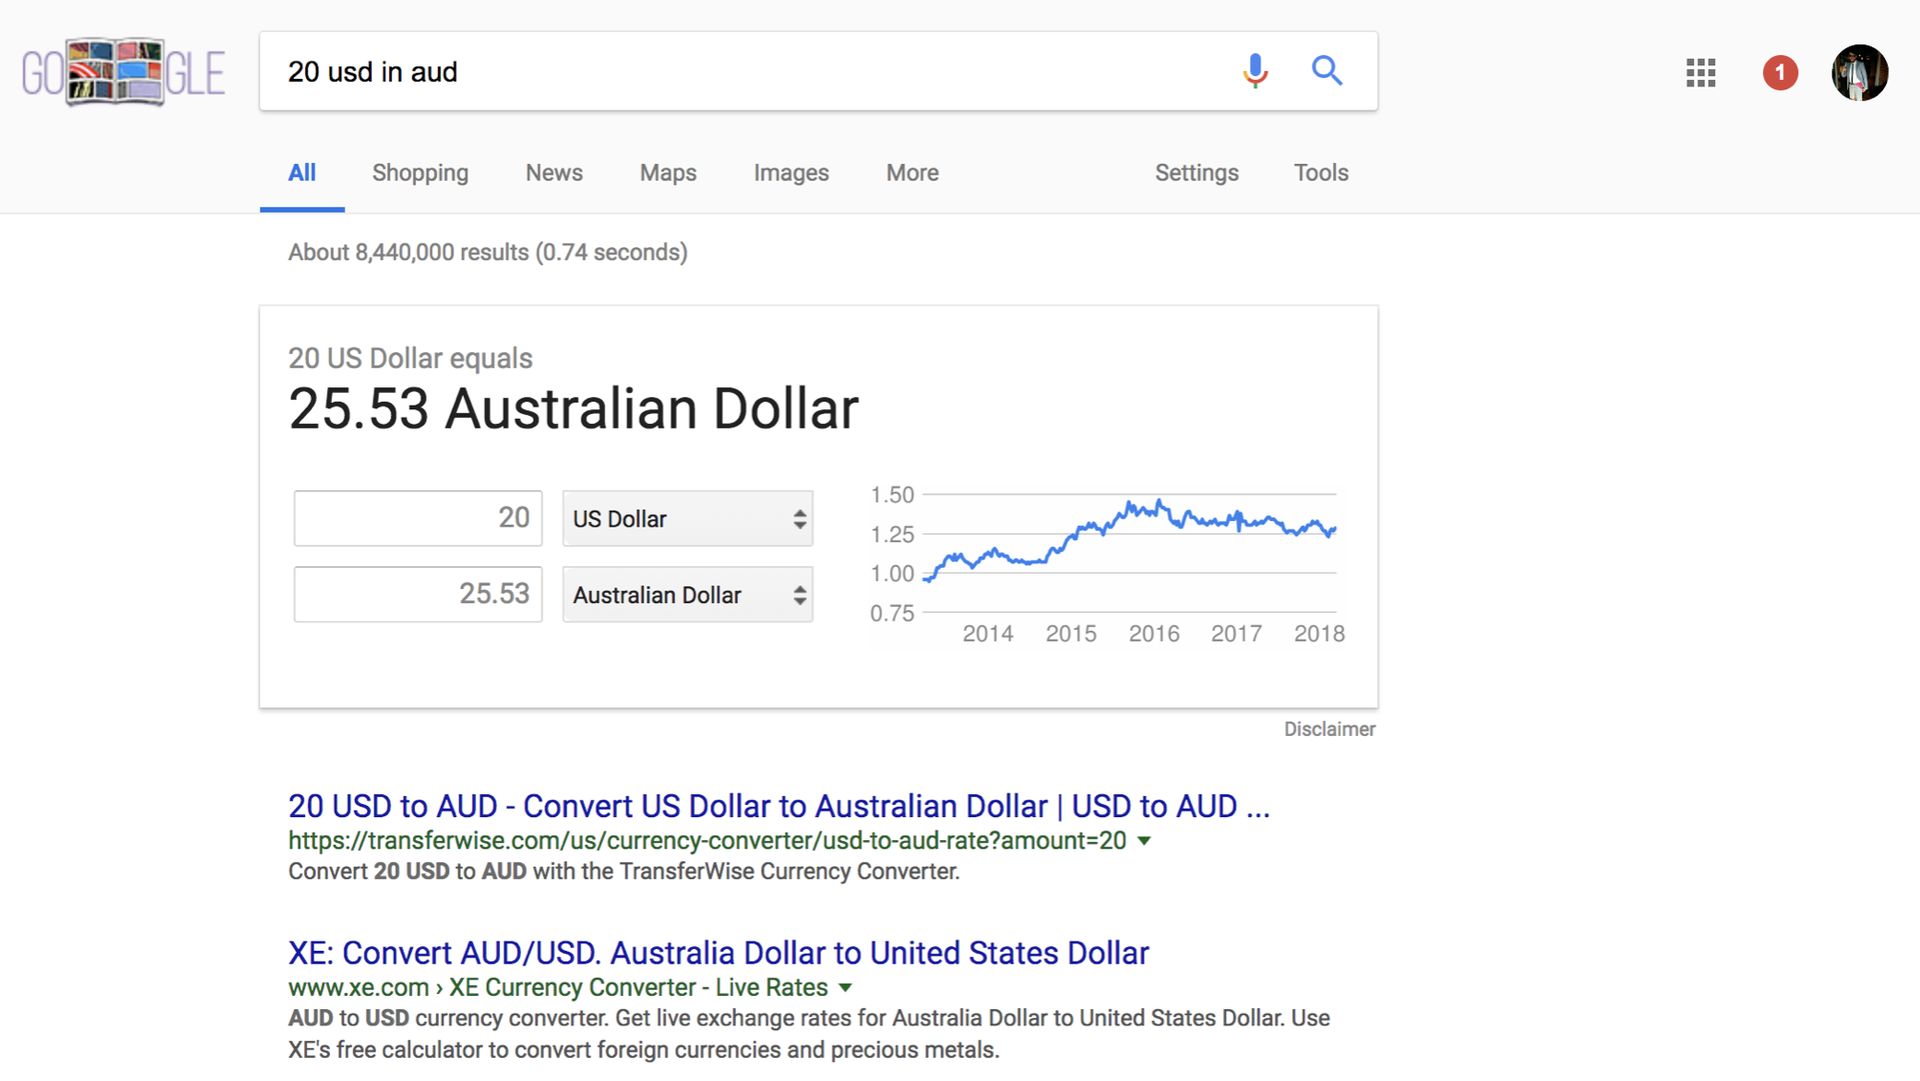 Google Search query screenshot for “20 usd to aud”